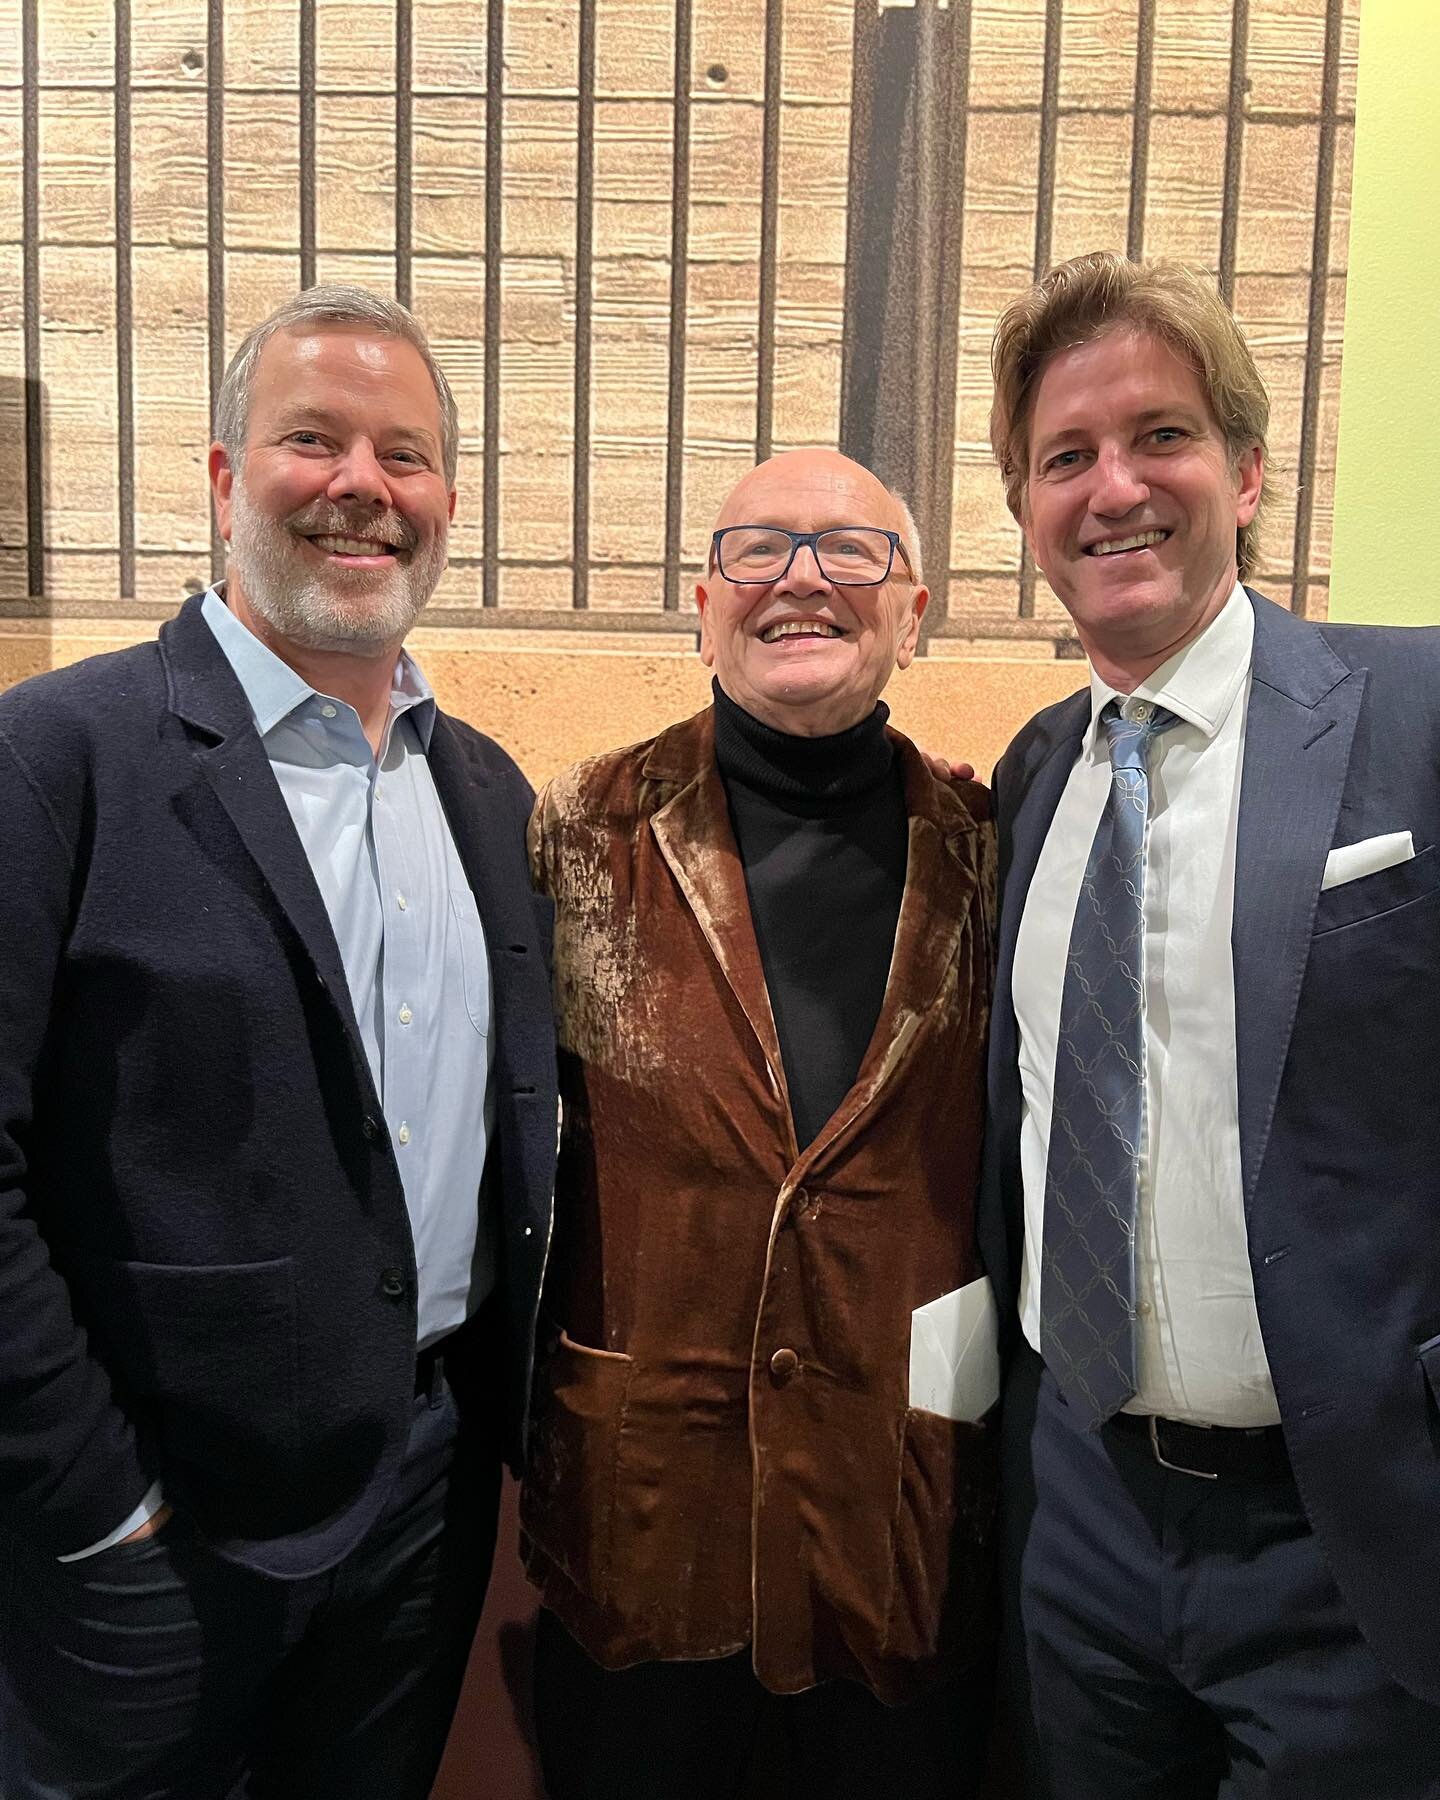 What an honor to participate in last Thursday&rsquo;s celebration of Jorge Silvetti&rsquo;s illustrious 47-year teaching career at Harvard University&rsquo;s Graduate School of Design. Jorge has been a generous mentor to both Conrad and Matt dating b